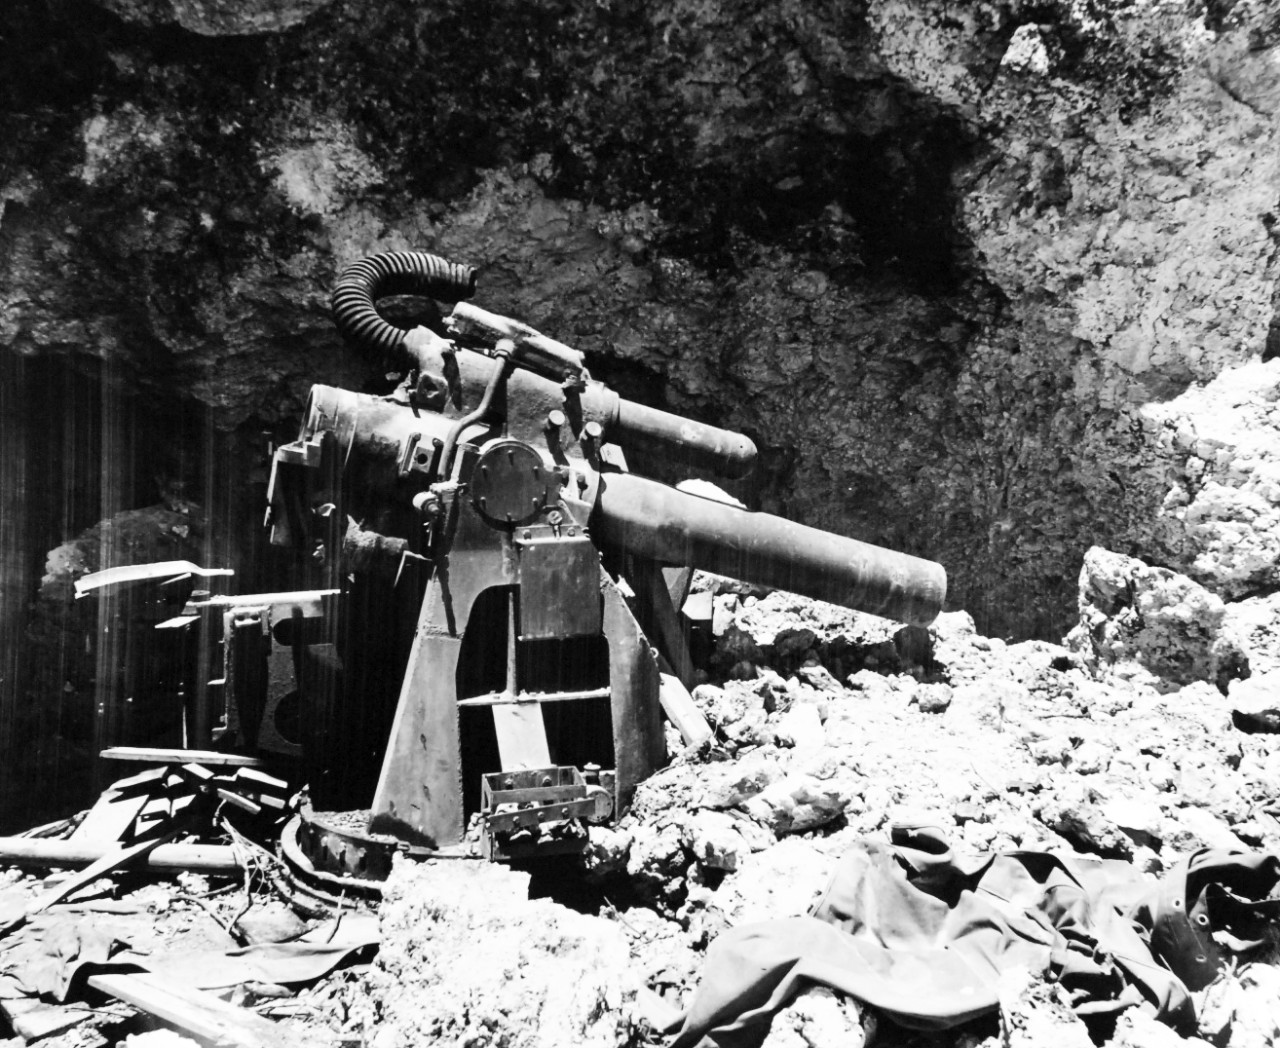 80-G-307741:  Invasion of Saipan, June-July 1944.  Japanese guns captured on Saipan Island after U.S. invasion, short 20mm gun.  Photograph received March 20, 1945.      Official U.S. Navy Photograph, now in the collections of the U.S. Navy.  (2017/04/11).  